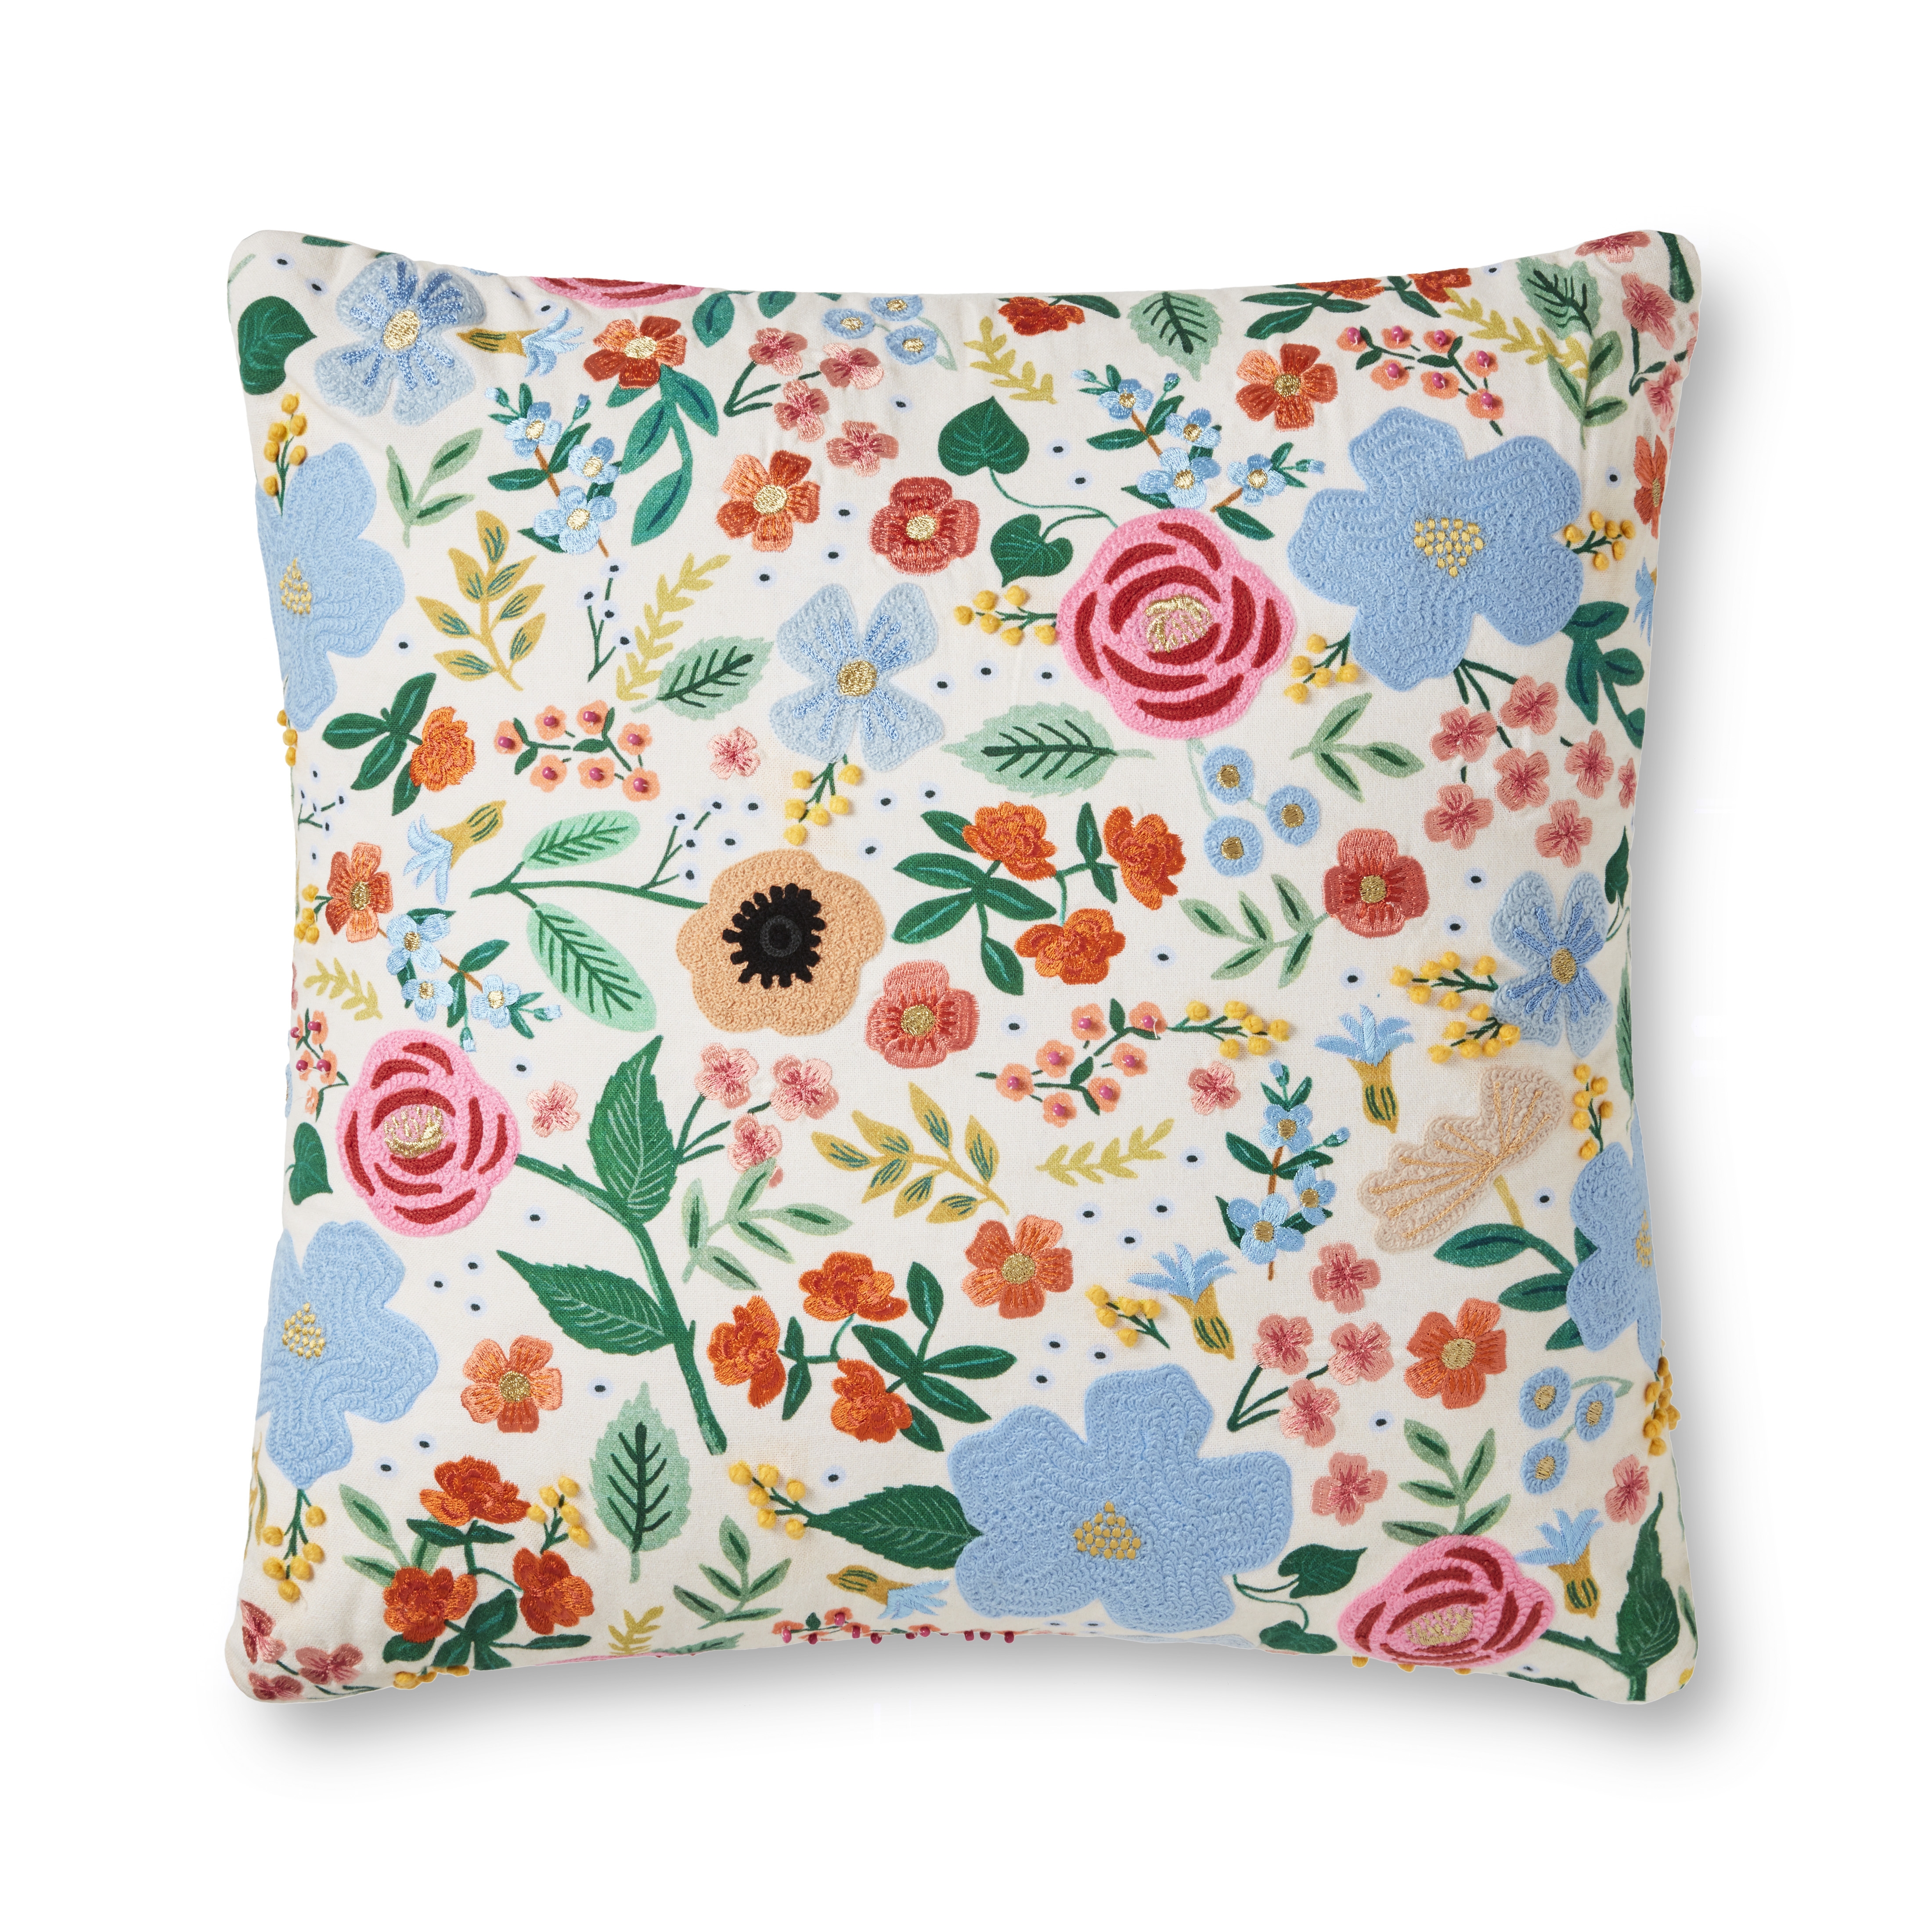 Rifle Paper Co. x Loloi Pillows P6059 Ivory / Multi 22" x 22" Cover Only - Image 0